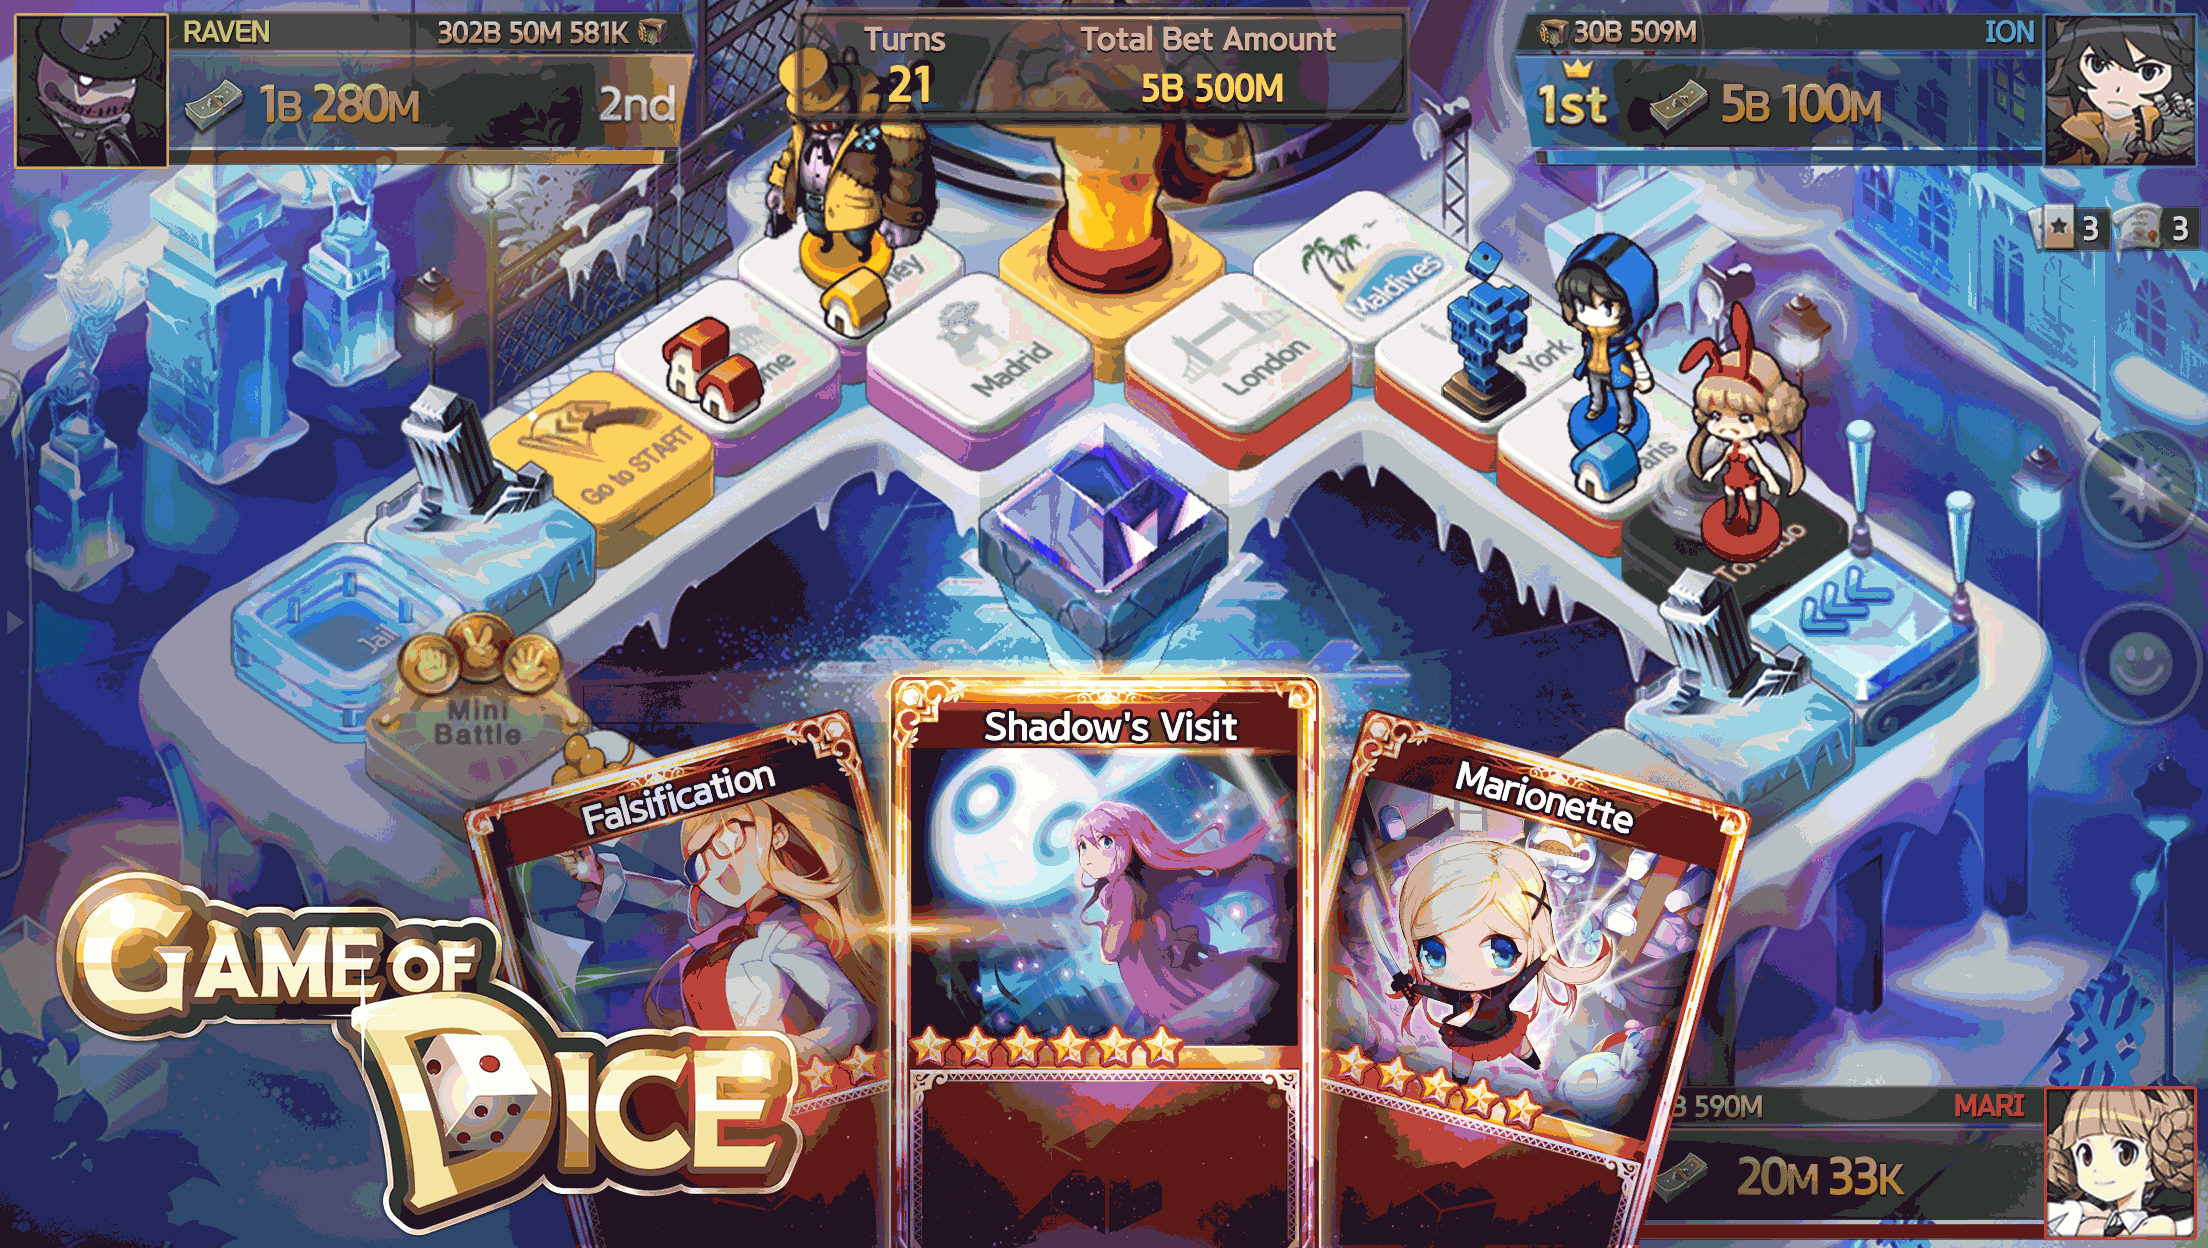 Game of Dice’s winter update will have you rolling in a winter wonderland